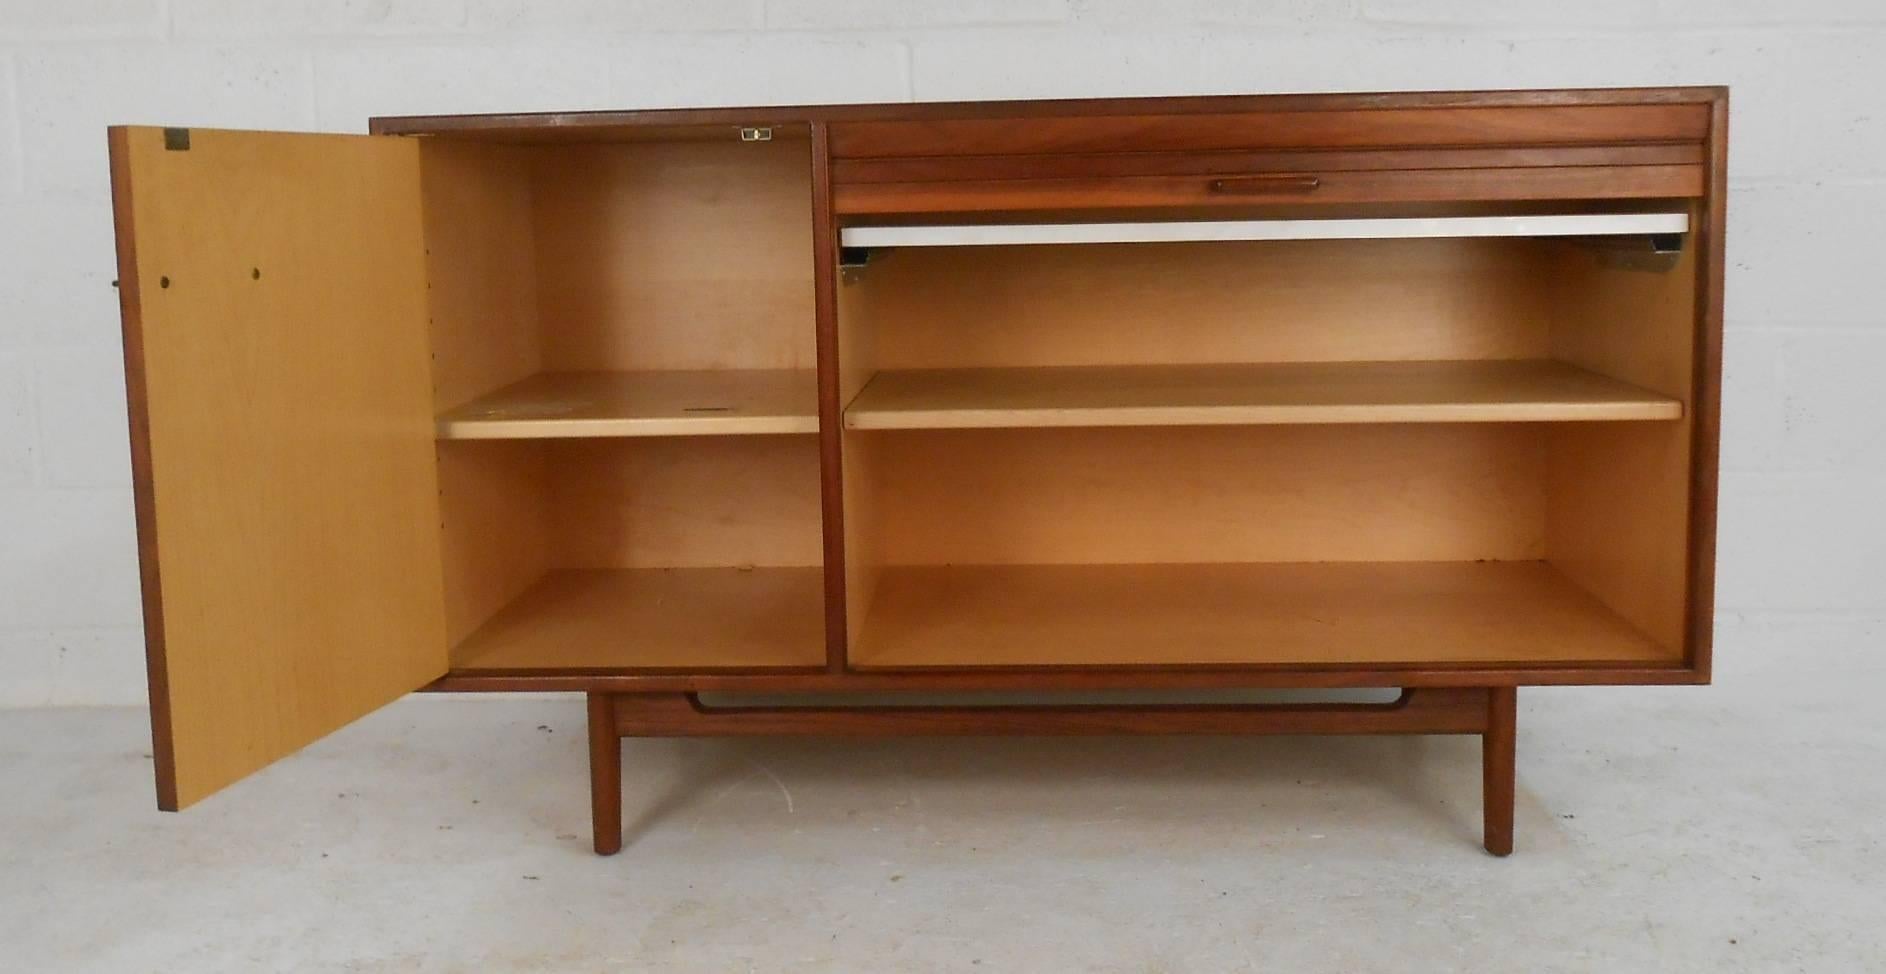 American Mid-Century Modern Small Credenza by Jens Risom